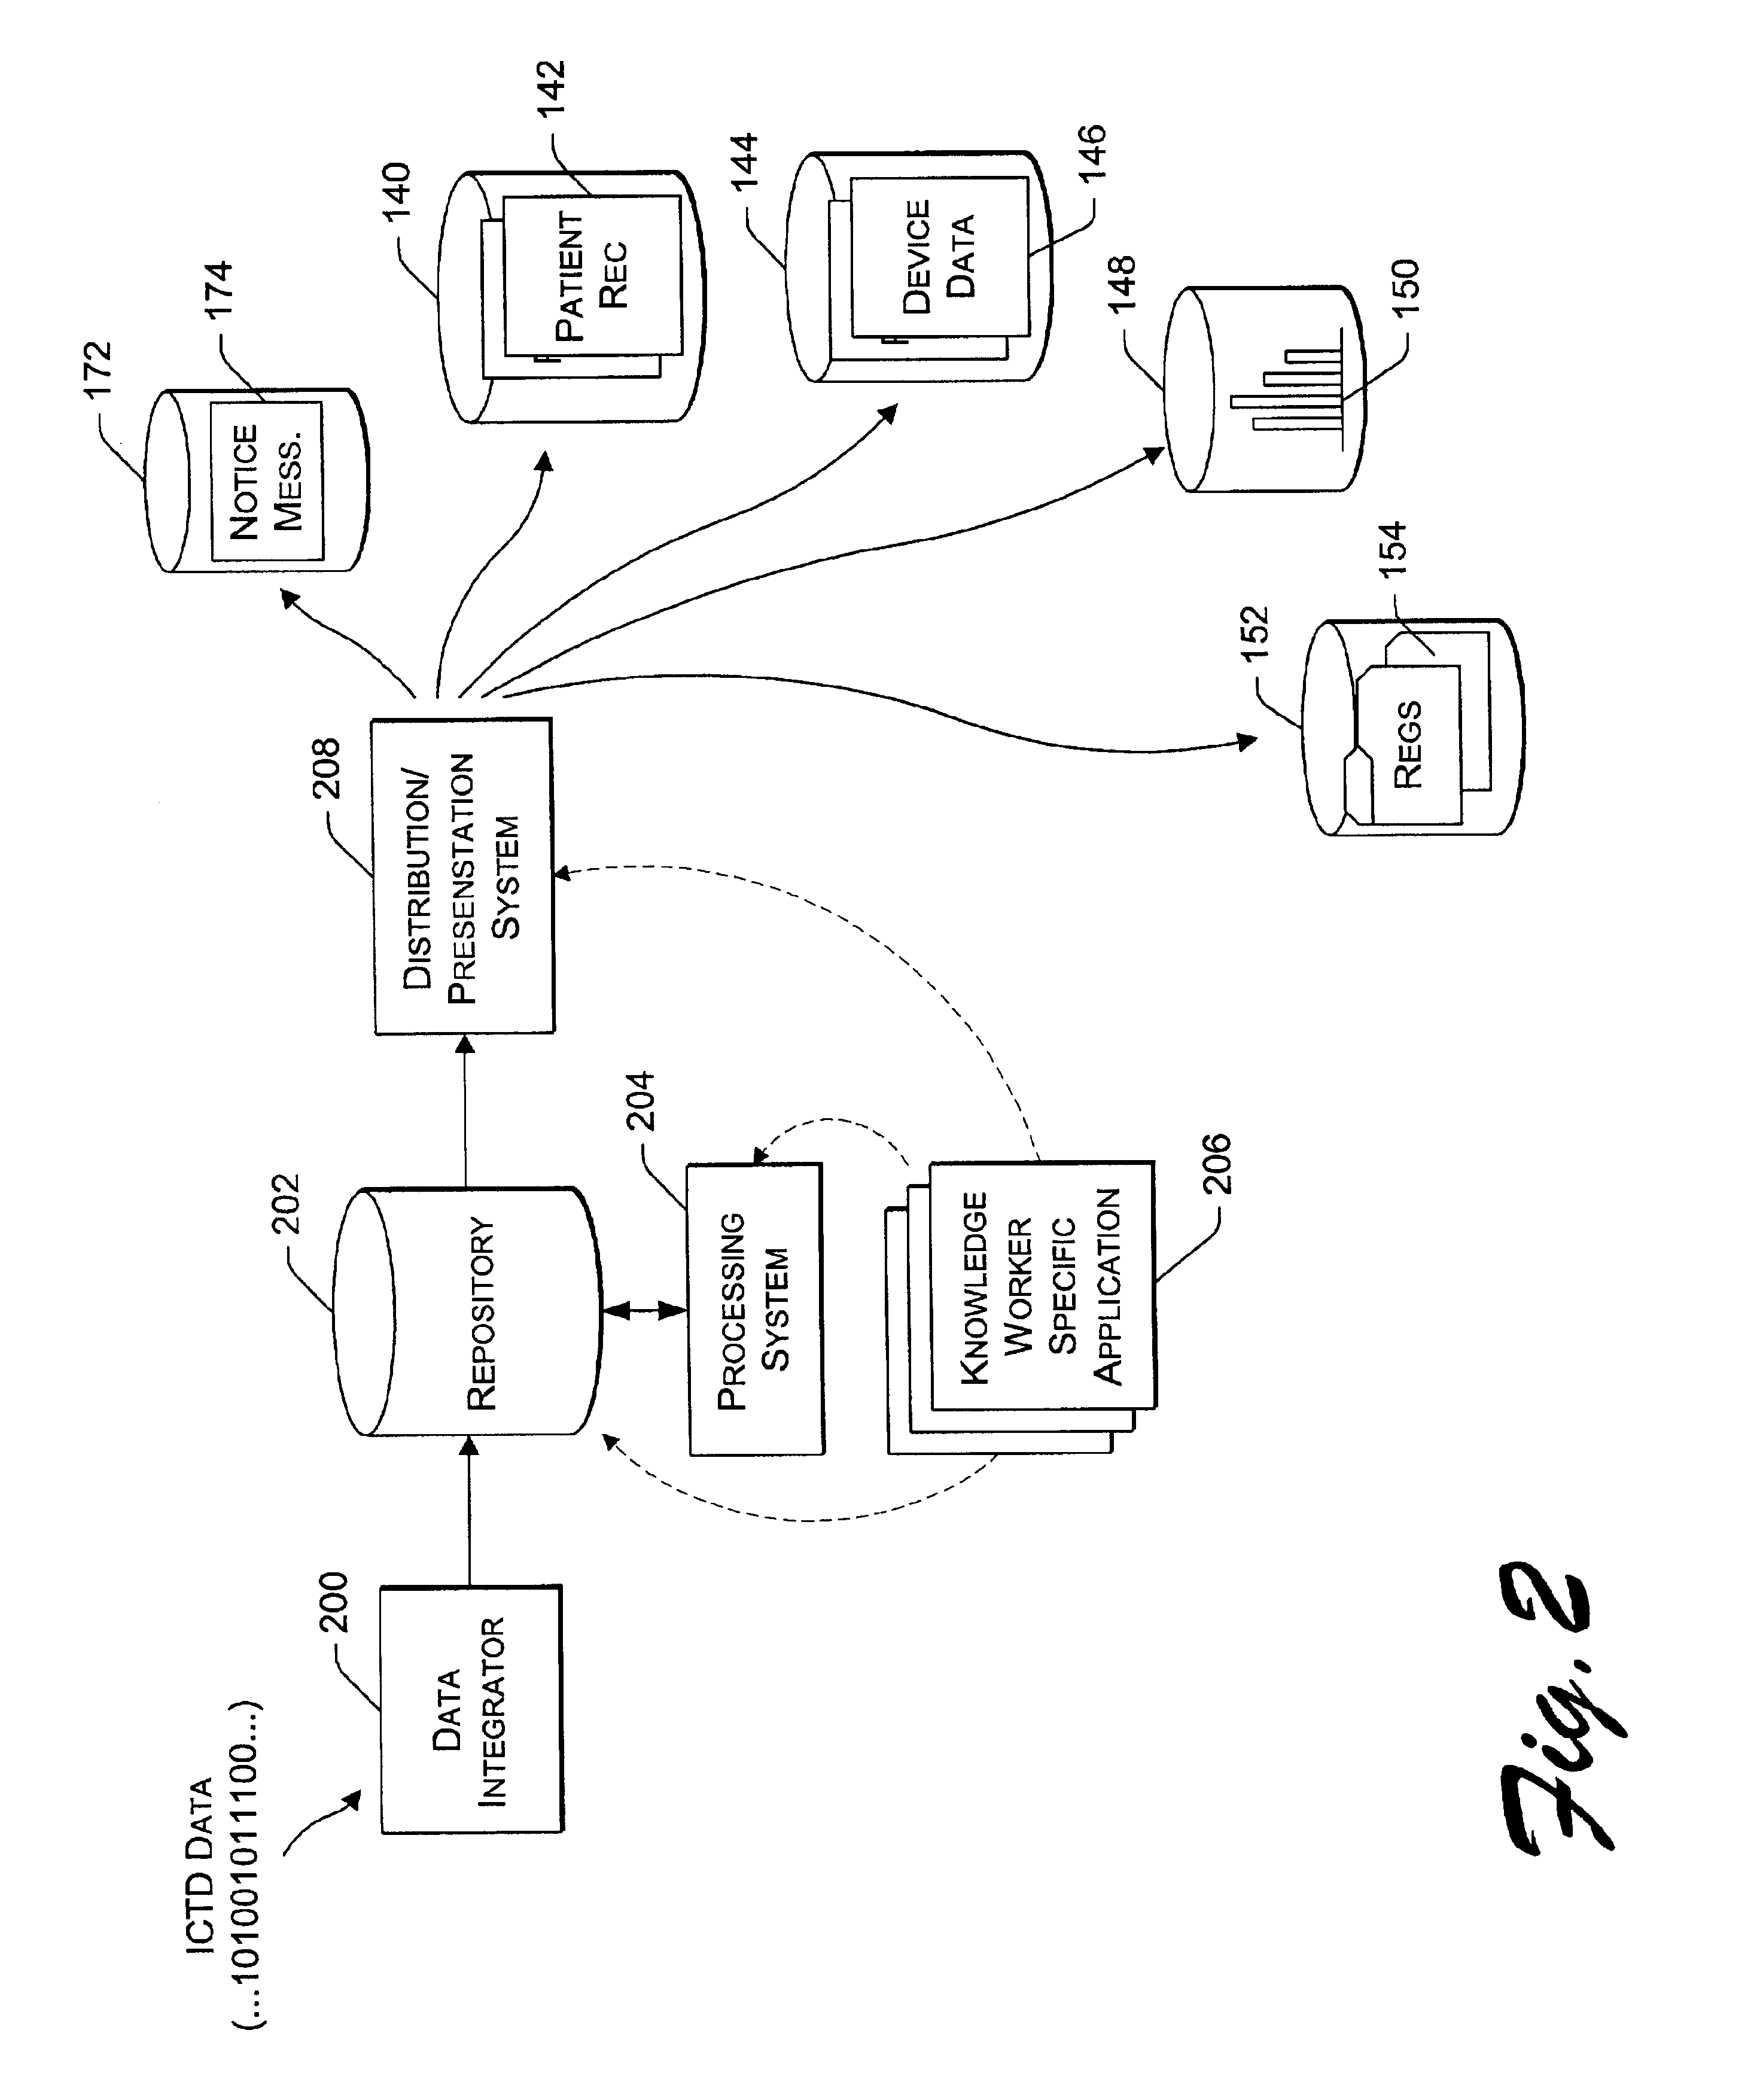 Presentation architecture for network supporting implantable cardiac therapy device